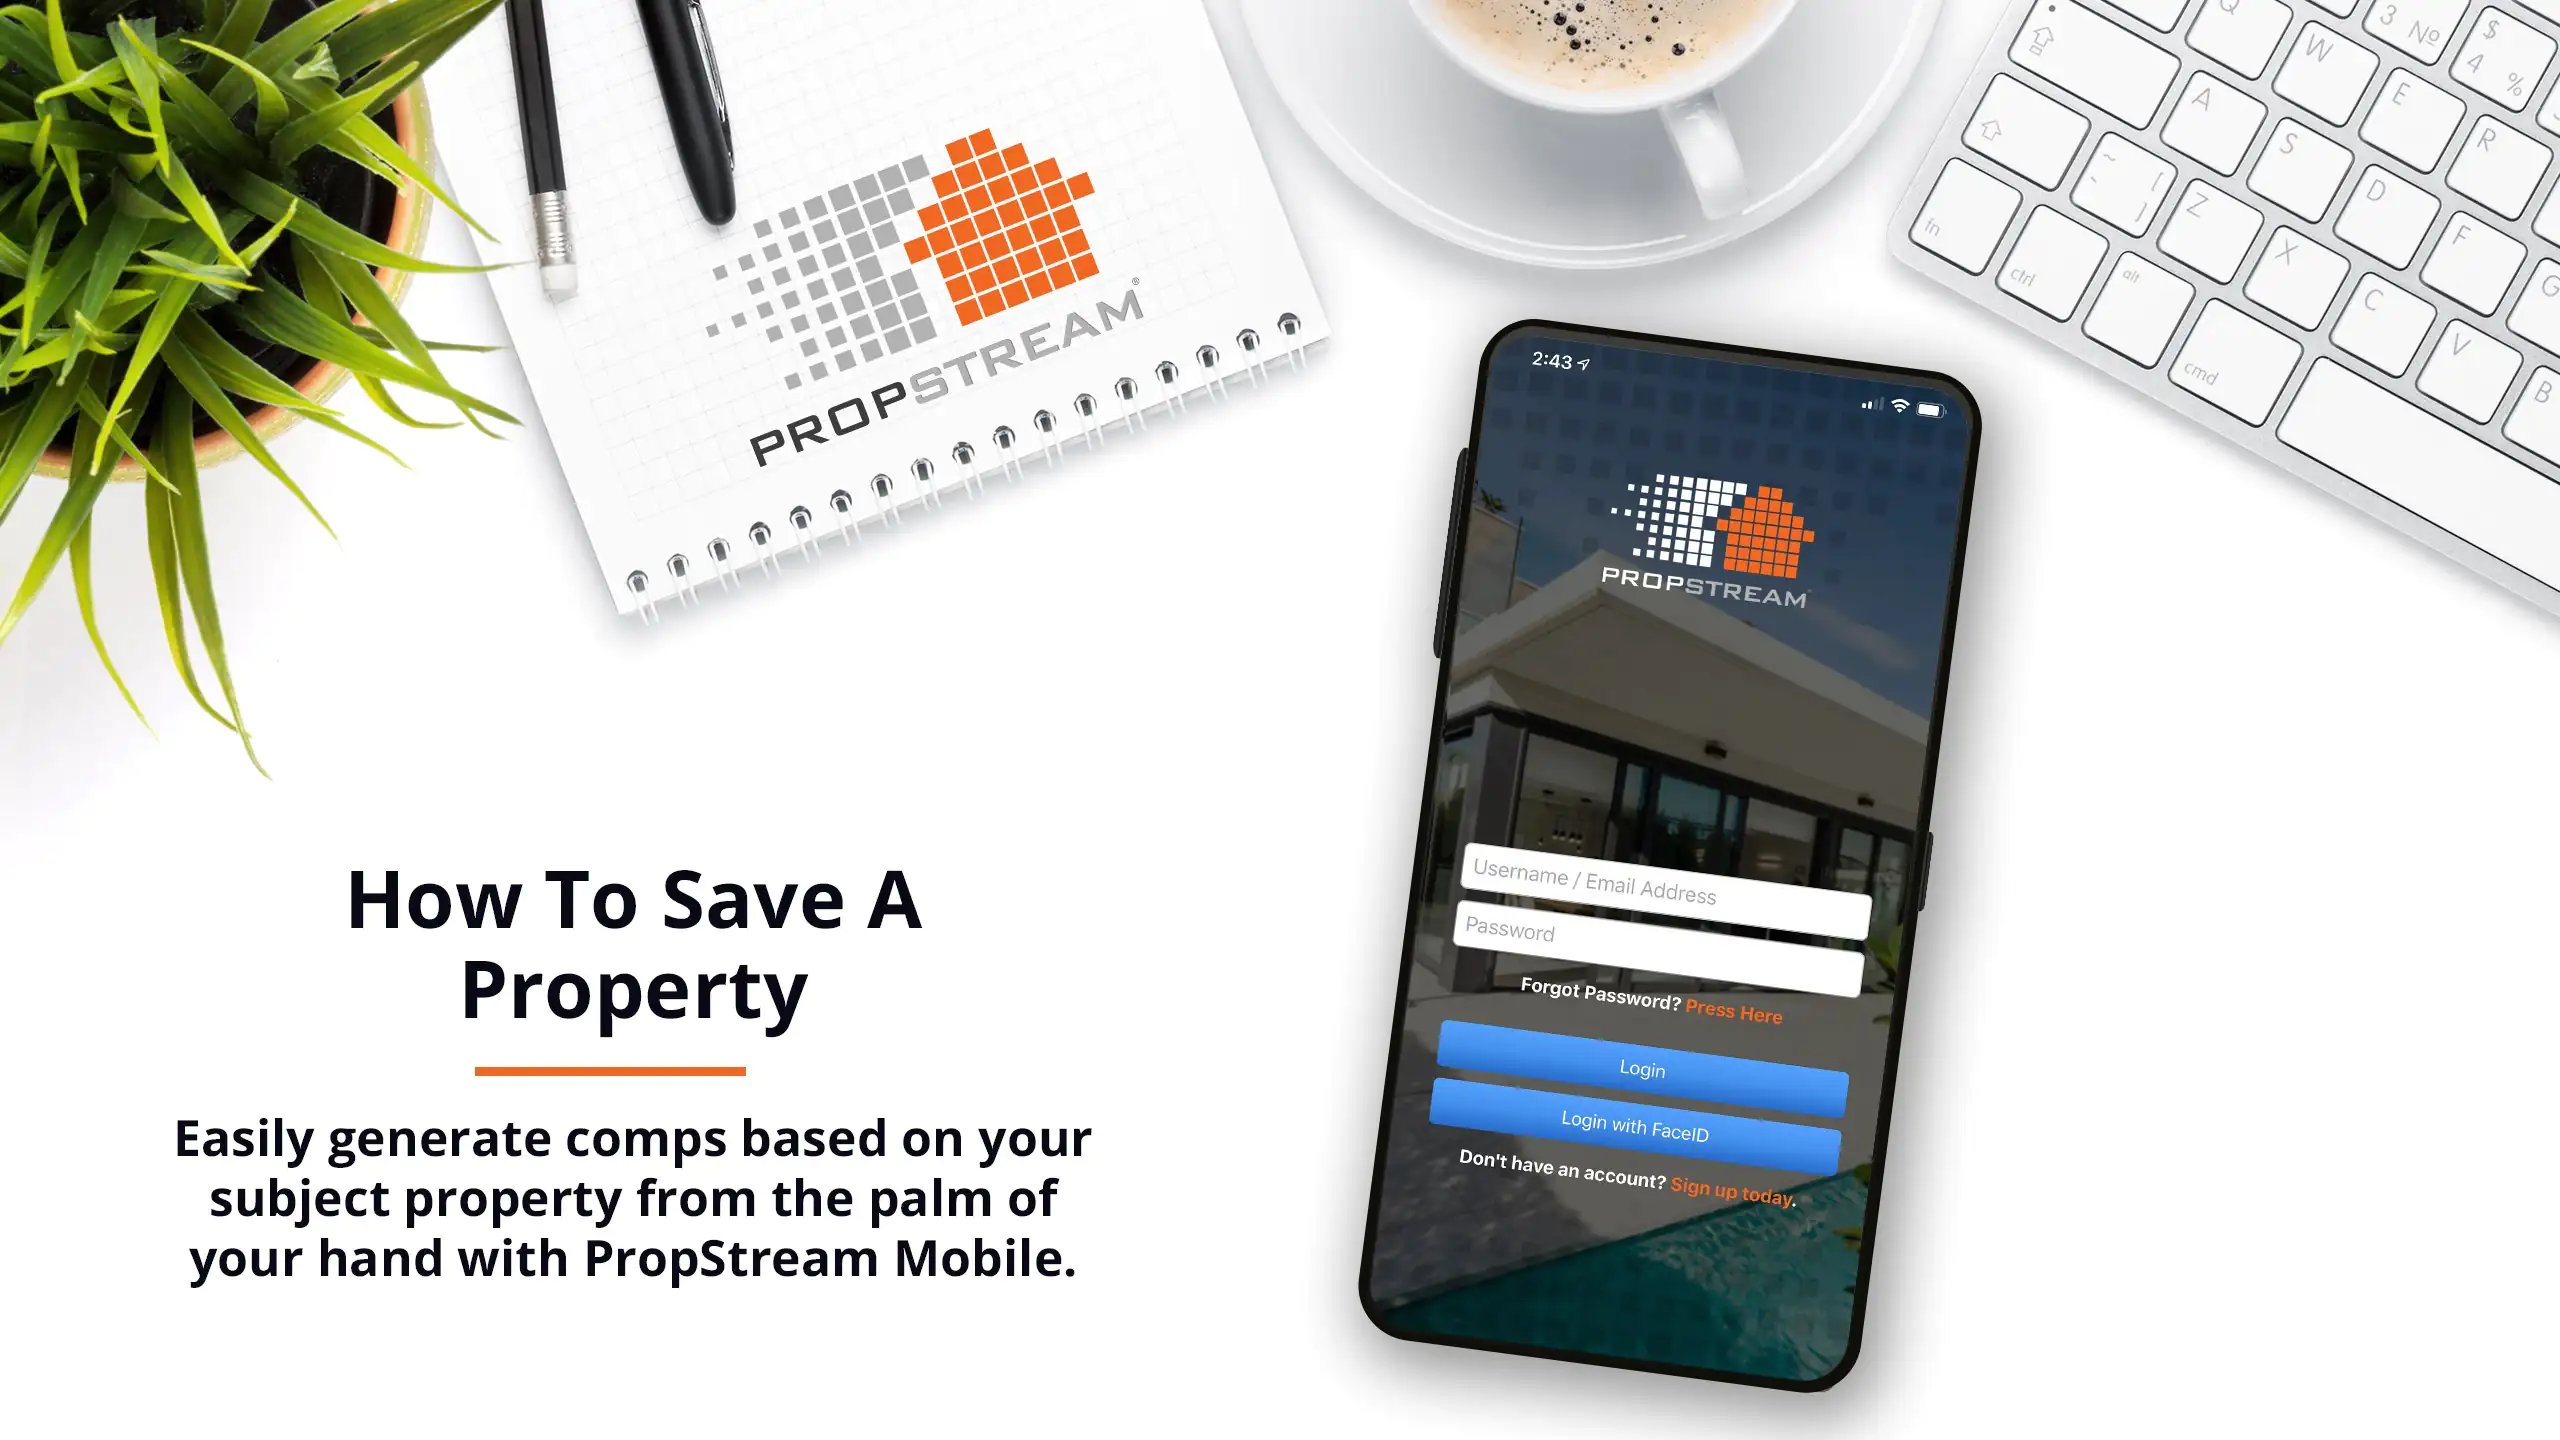 PropStream Mobile - How To Save A Property